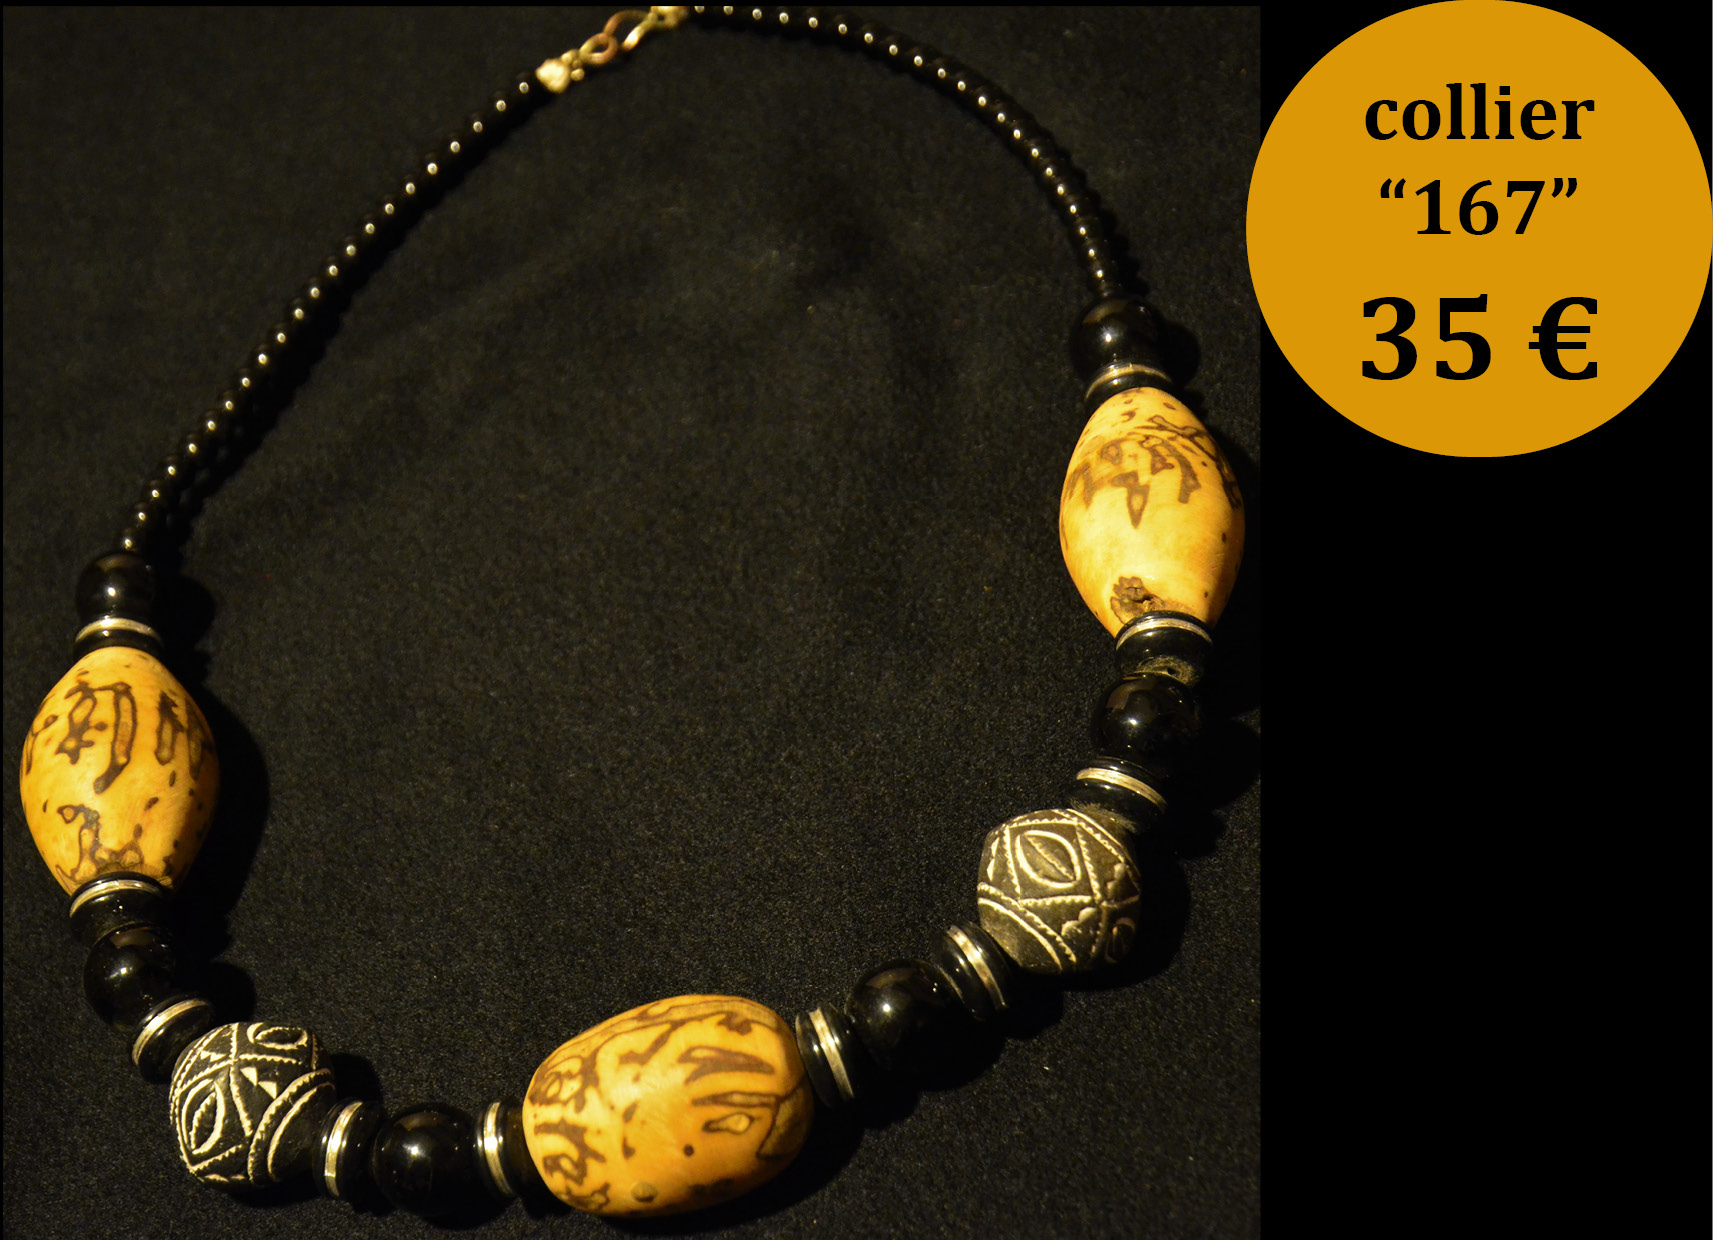 Collier "167"